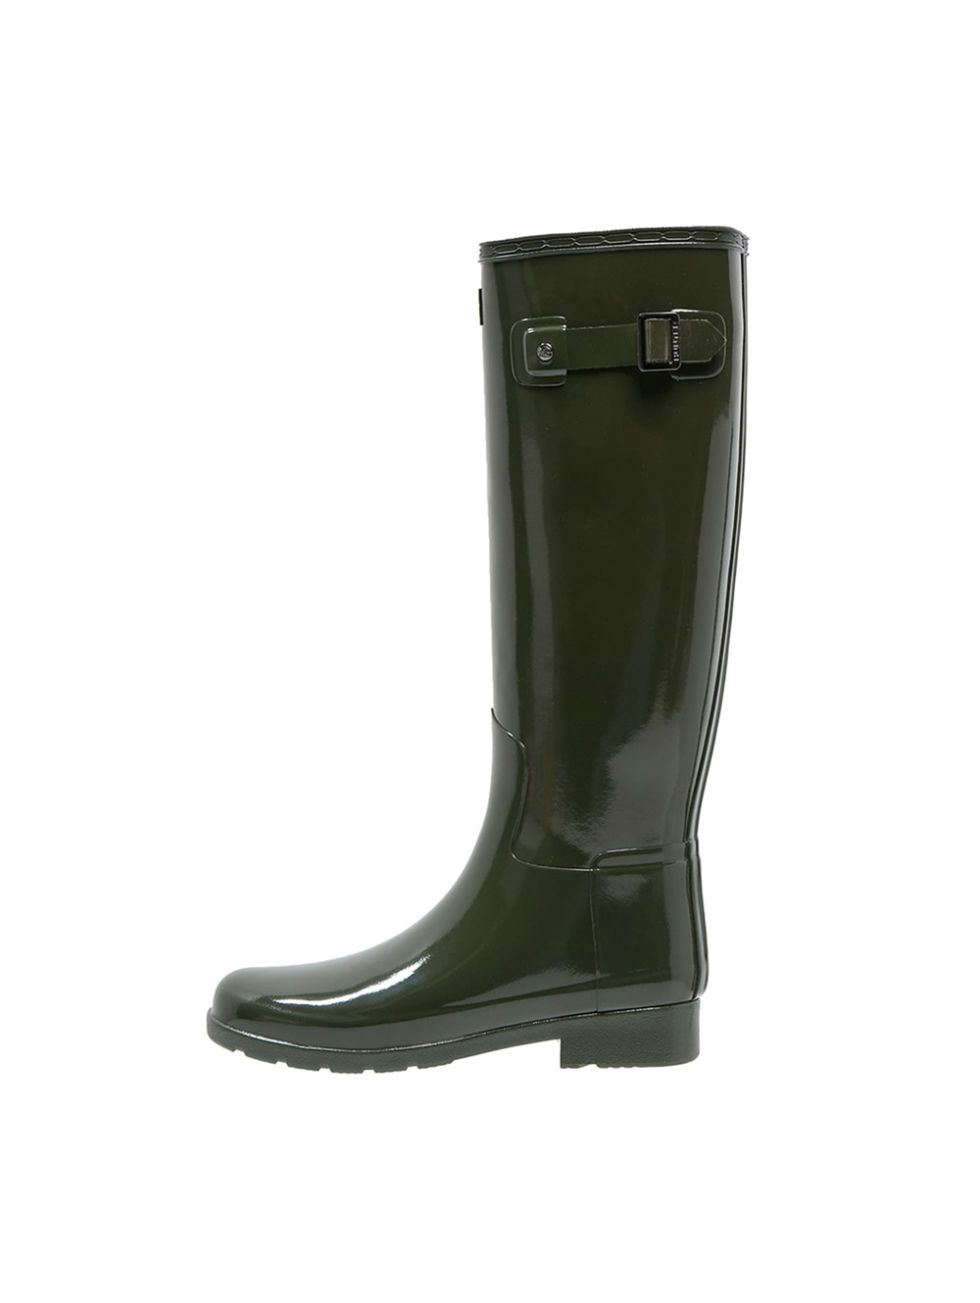 Brown, Boot, Black, Grey, Leather, Riding boot, Rain boot, Knee-high boot, 